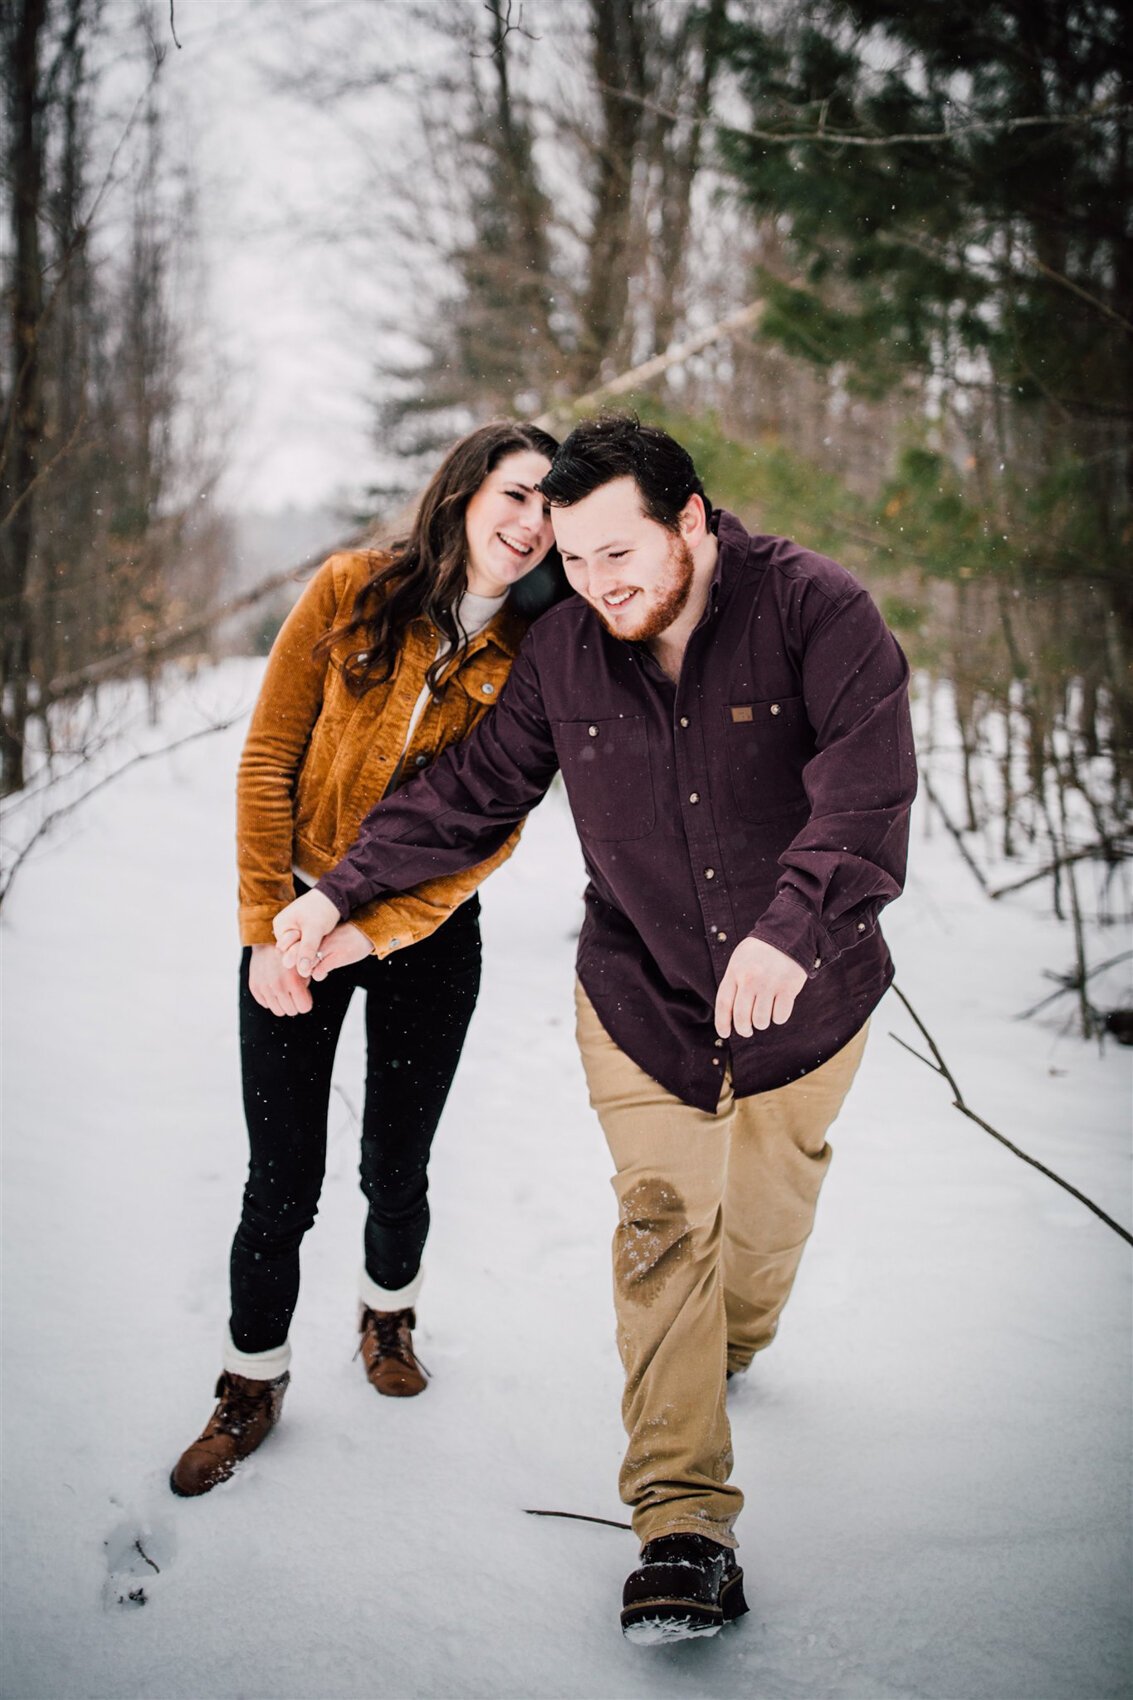 Carlie-and-Joe-Engagement-Pictures-Winter-2020-18.jpg